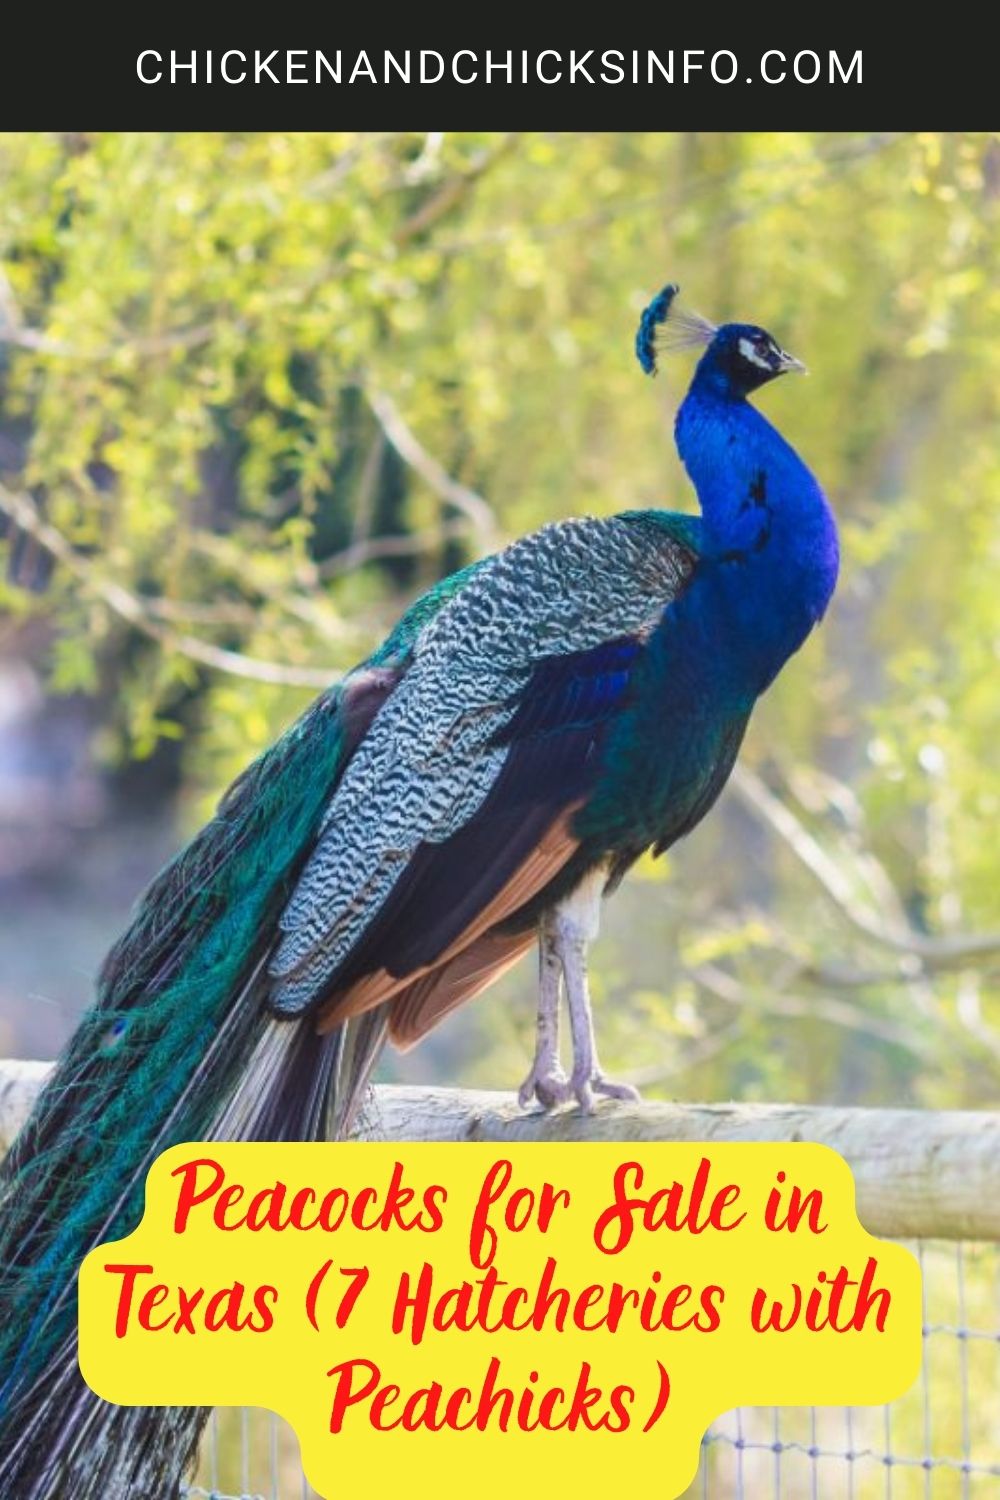 Peacocks for sale in Texas poster.